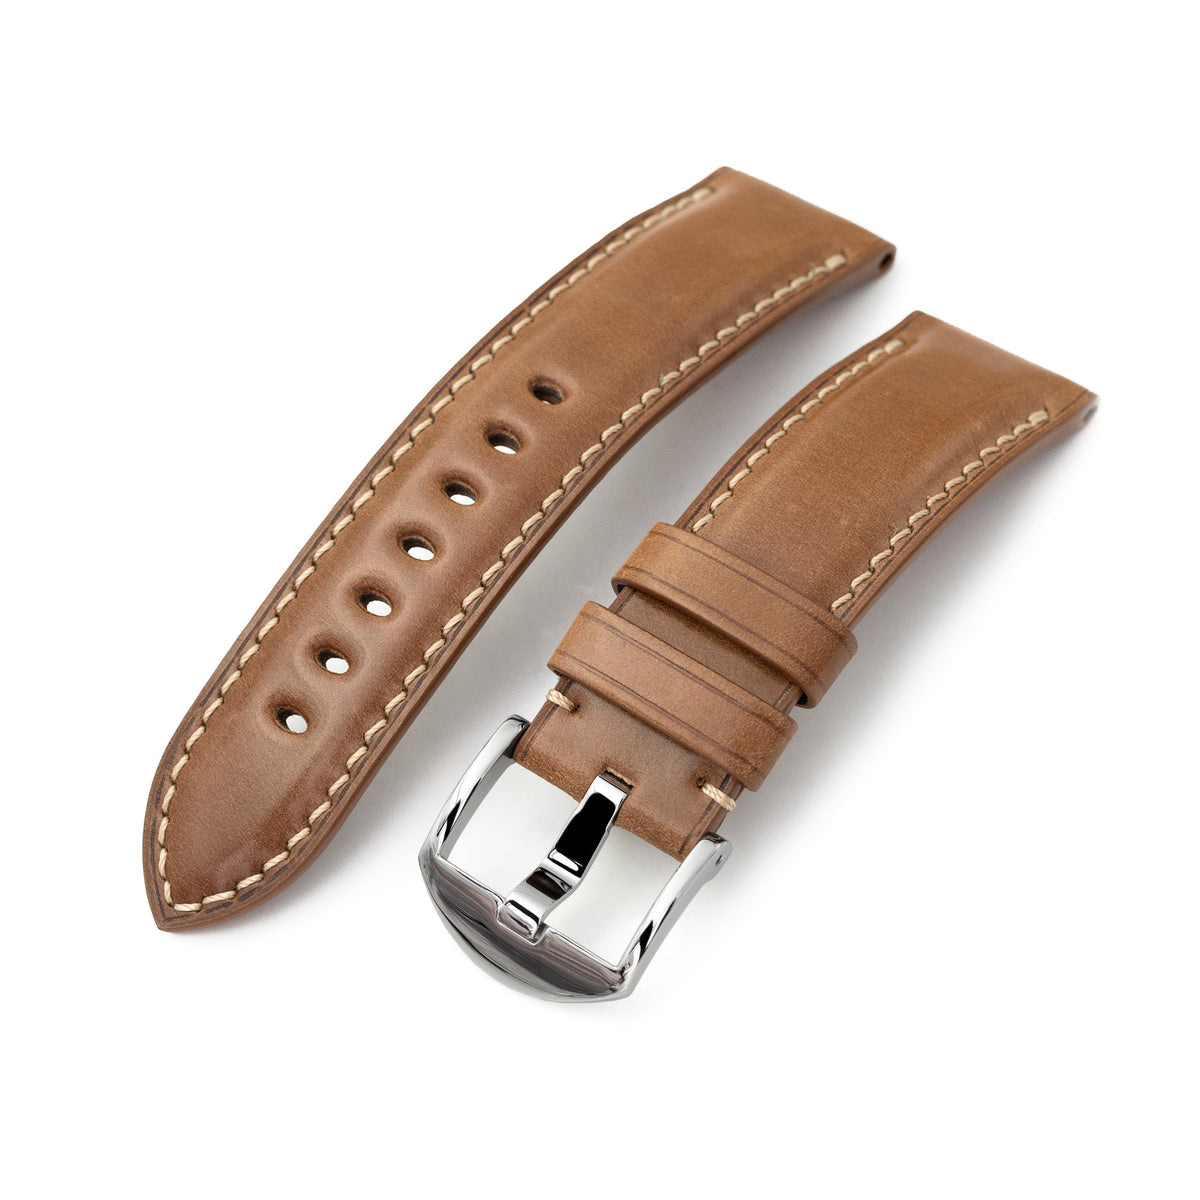 Genuine Leather Watch Straps / Watch Bands